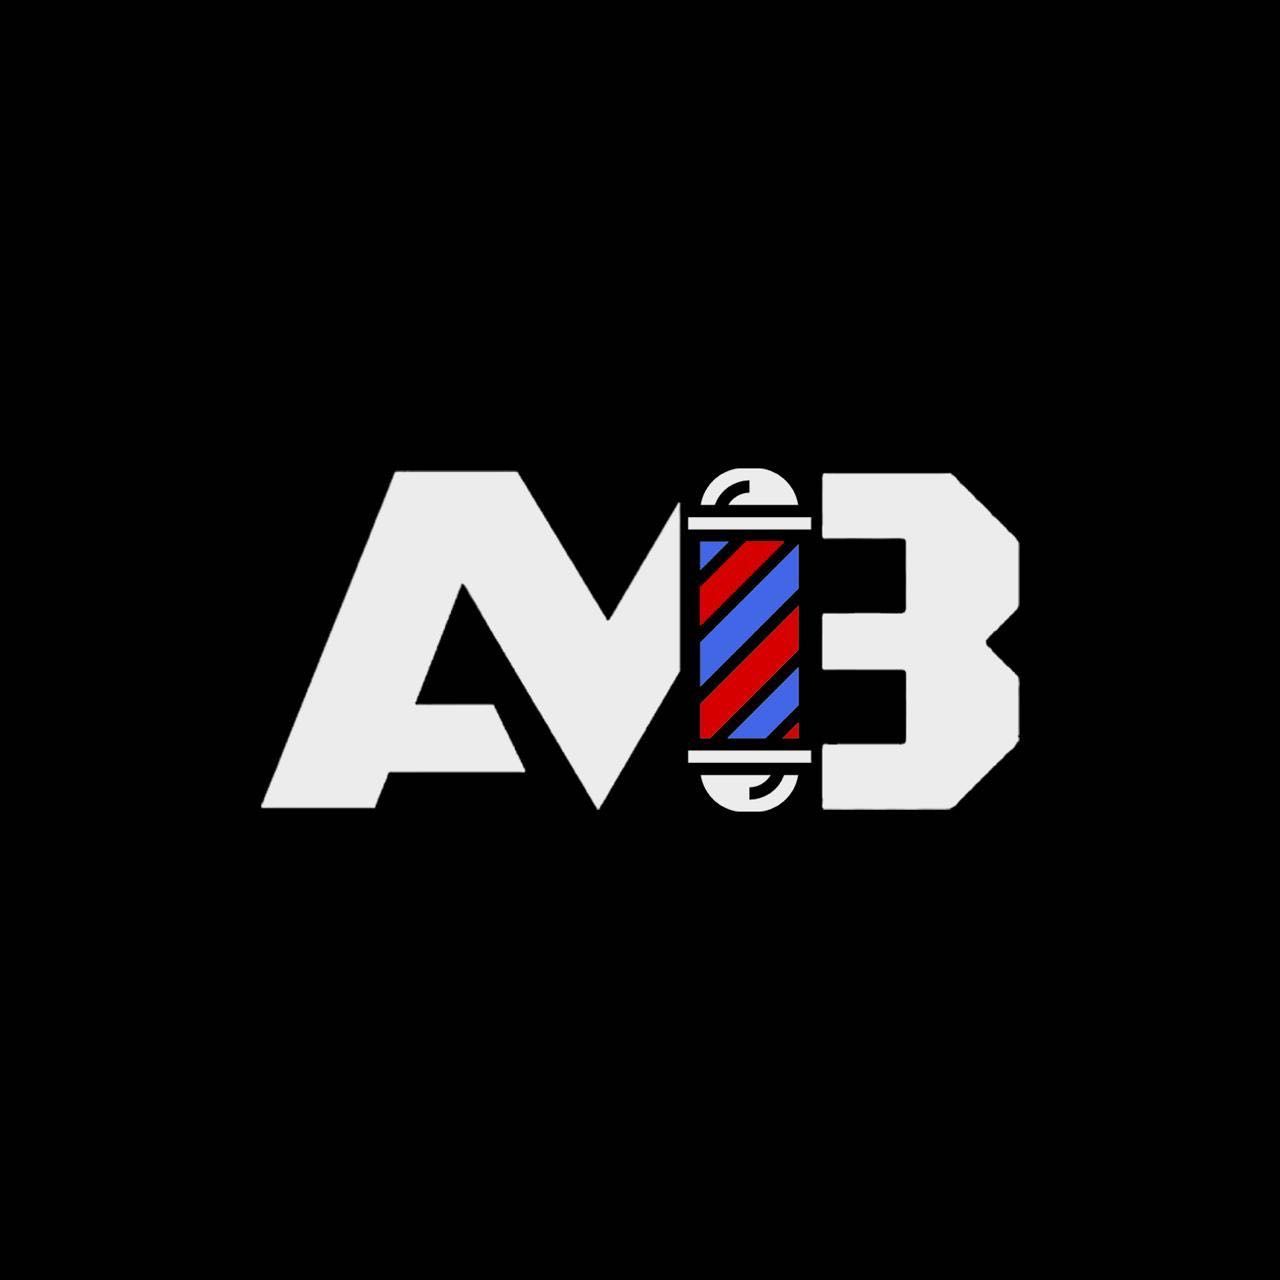 Amanuelbarber, 1724 S Congress Ave, Palm Springs, 33461